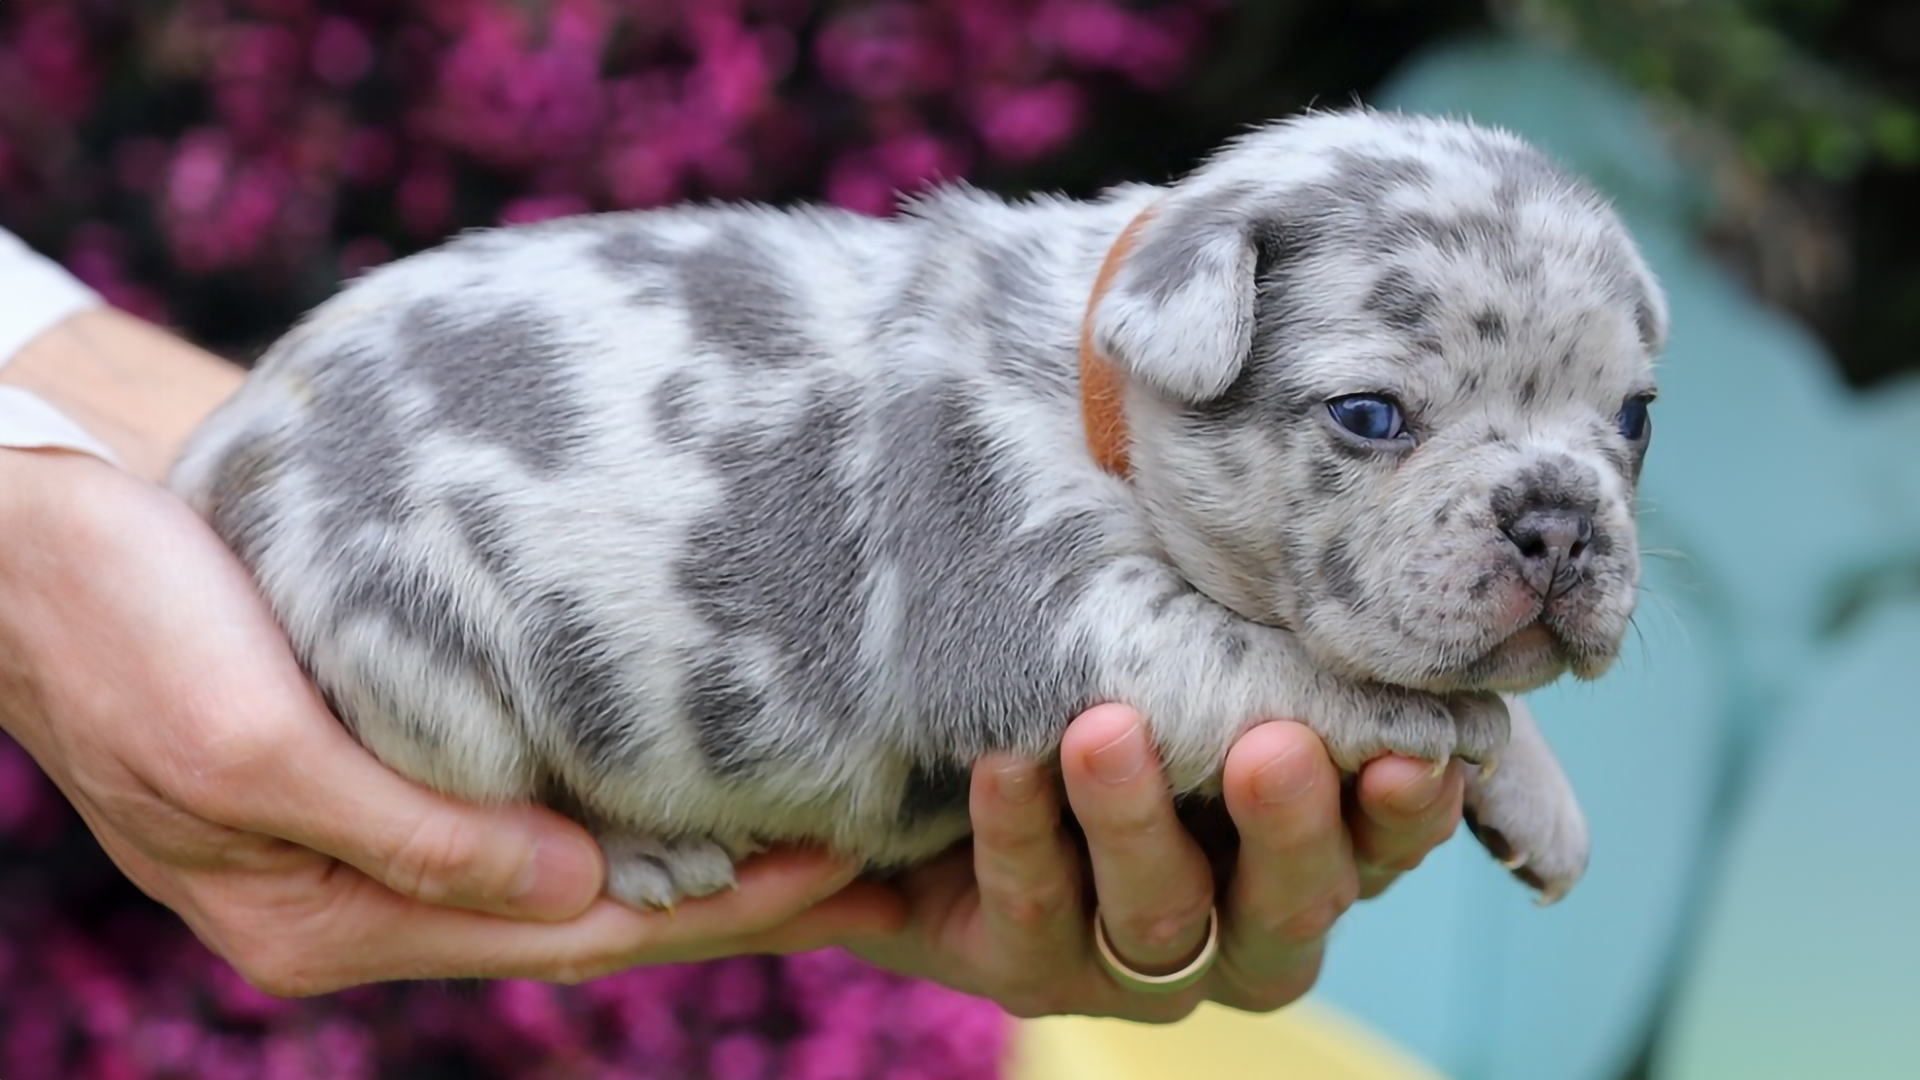 This is a blue merle French Bulldog. This is just one of the coat colors that Frenchies have.